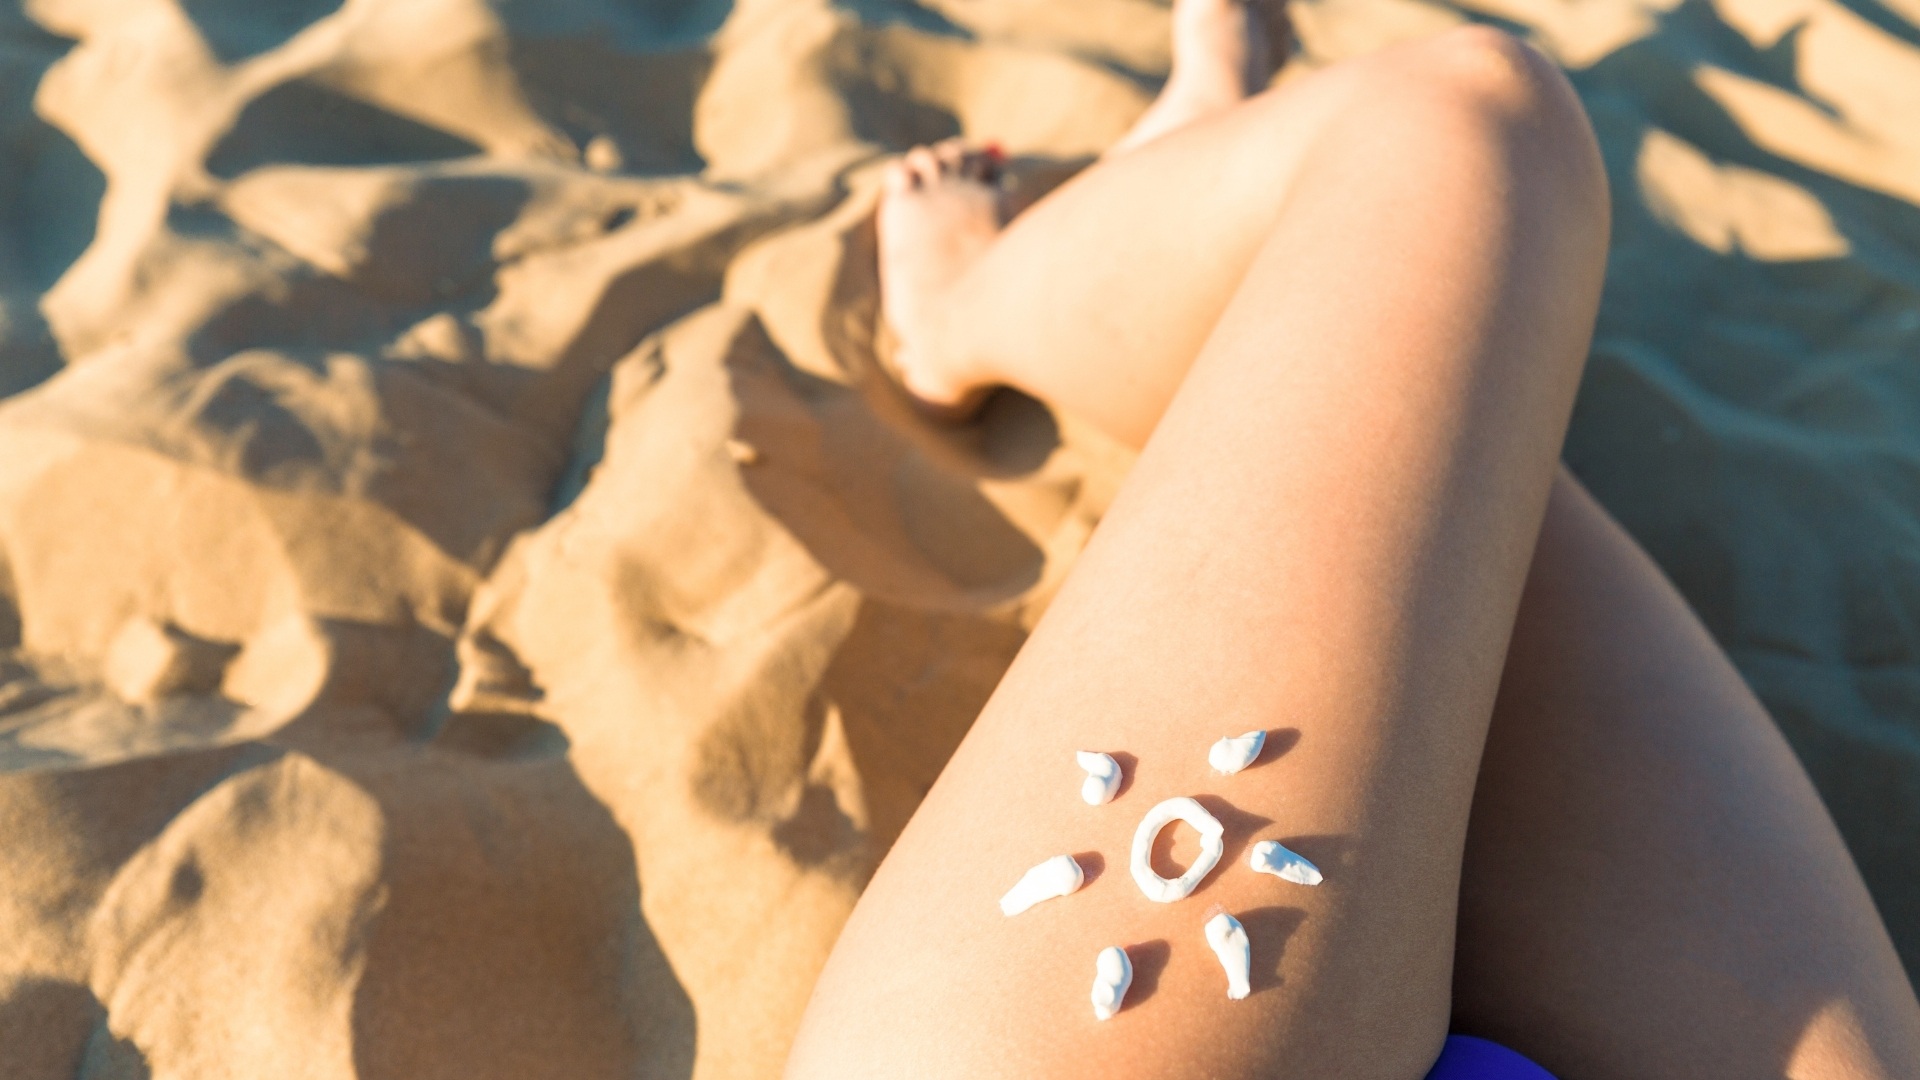 How to get the best tan while traveling safely